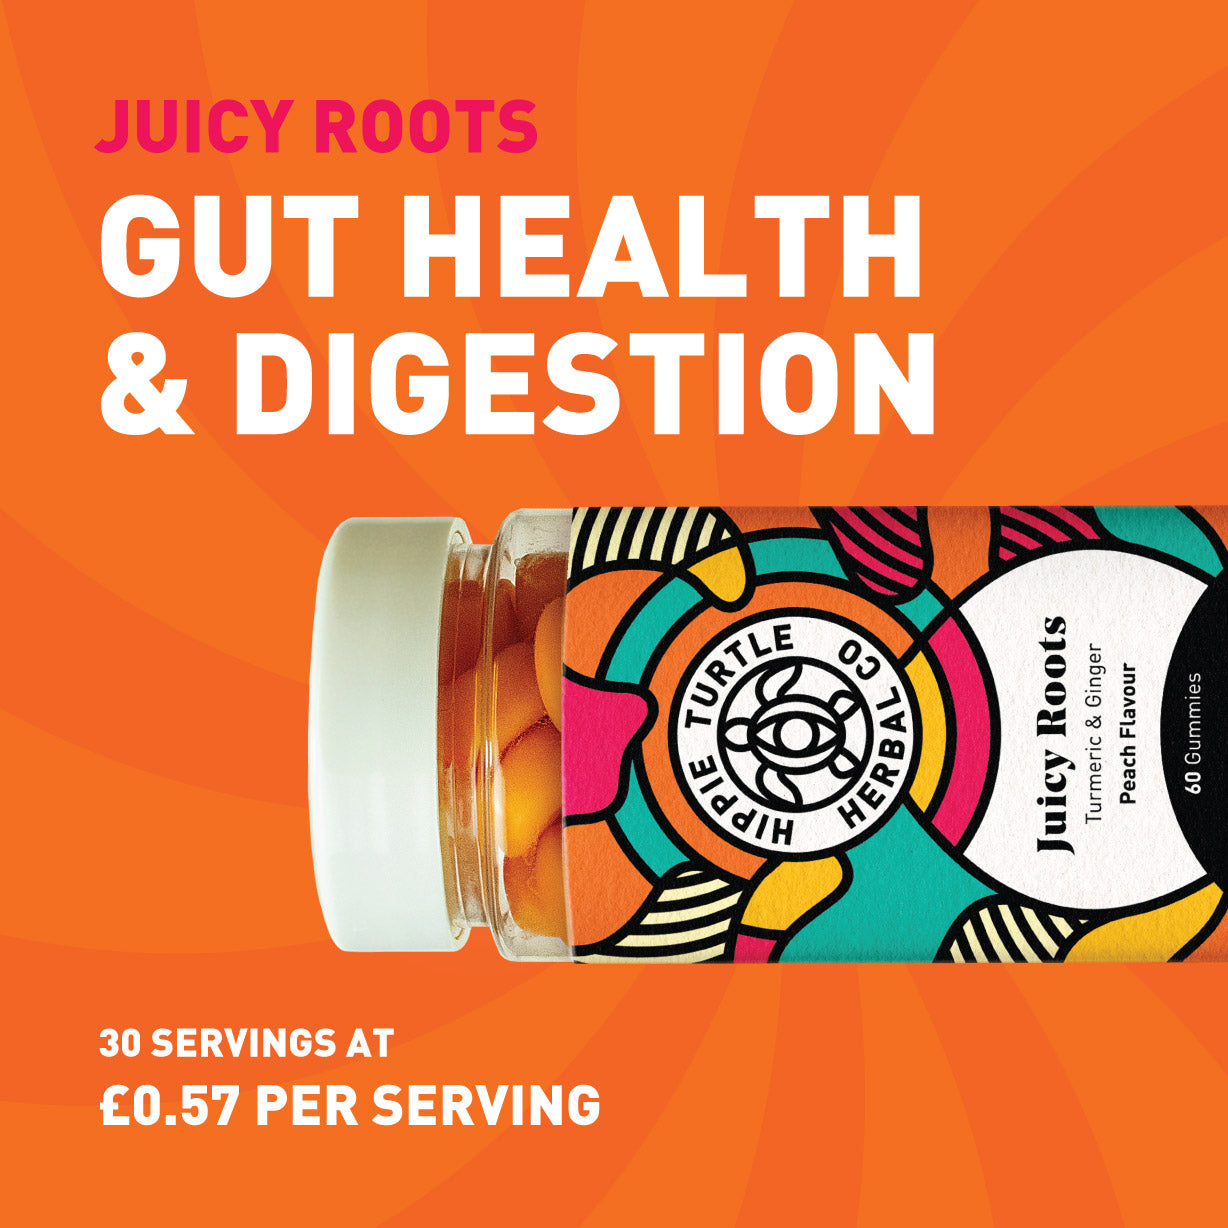 Gut health and digestion supplement in chewable gummy supplement. Hippie turtle herbal co premium turmeric and ginger gummies